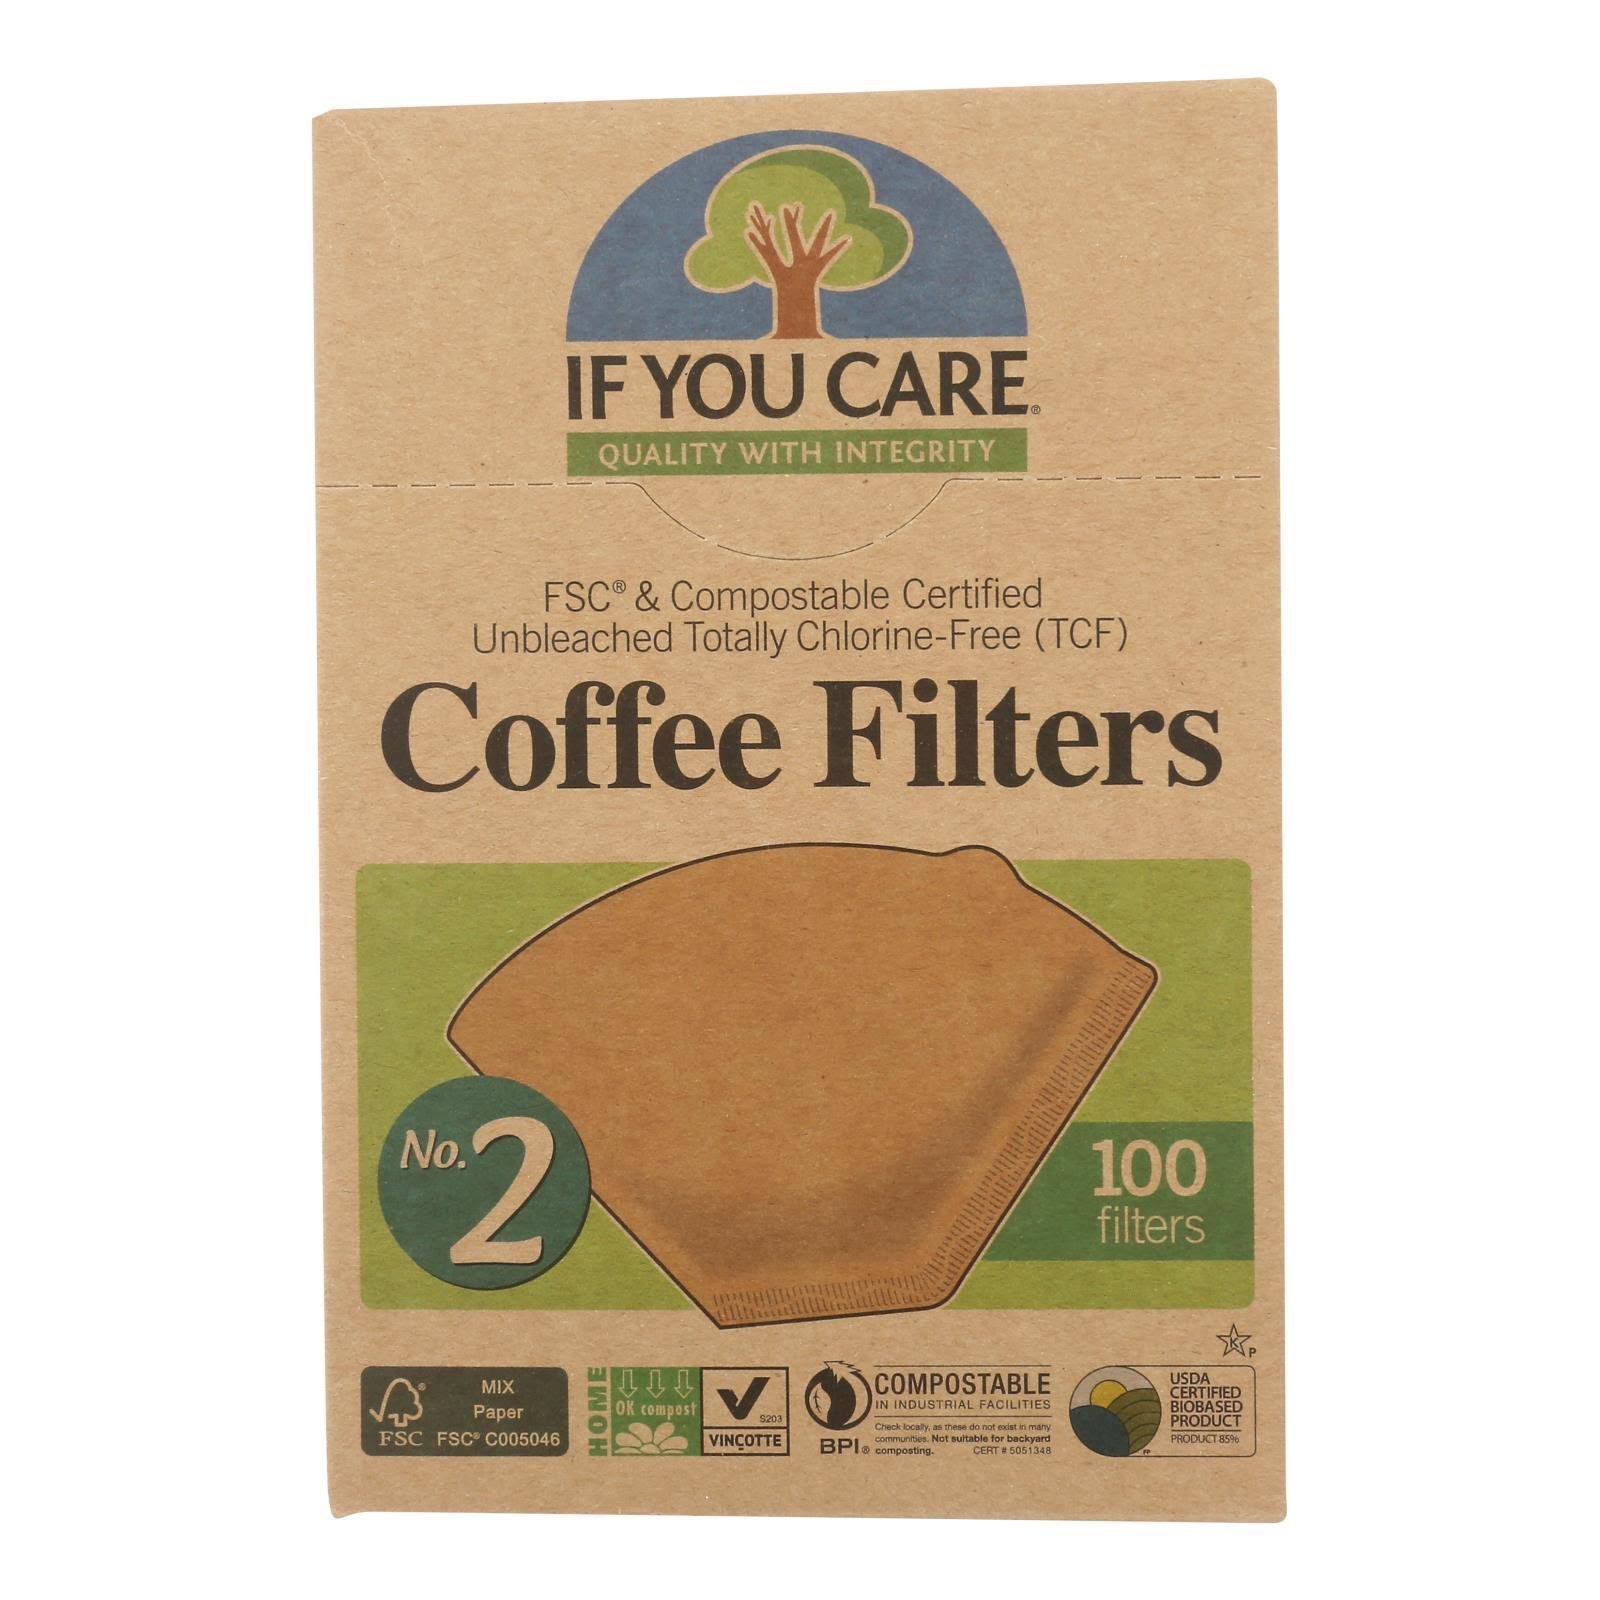 If You Care Coffee Filters - No.2 Size, 100 Filters